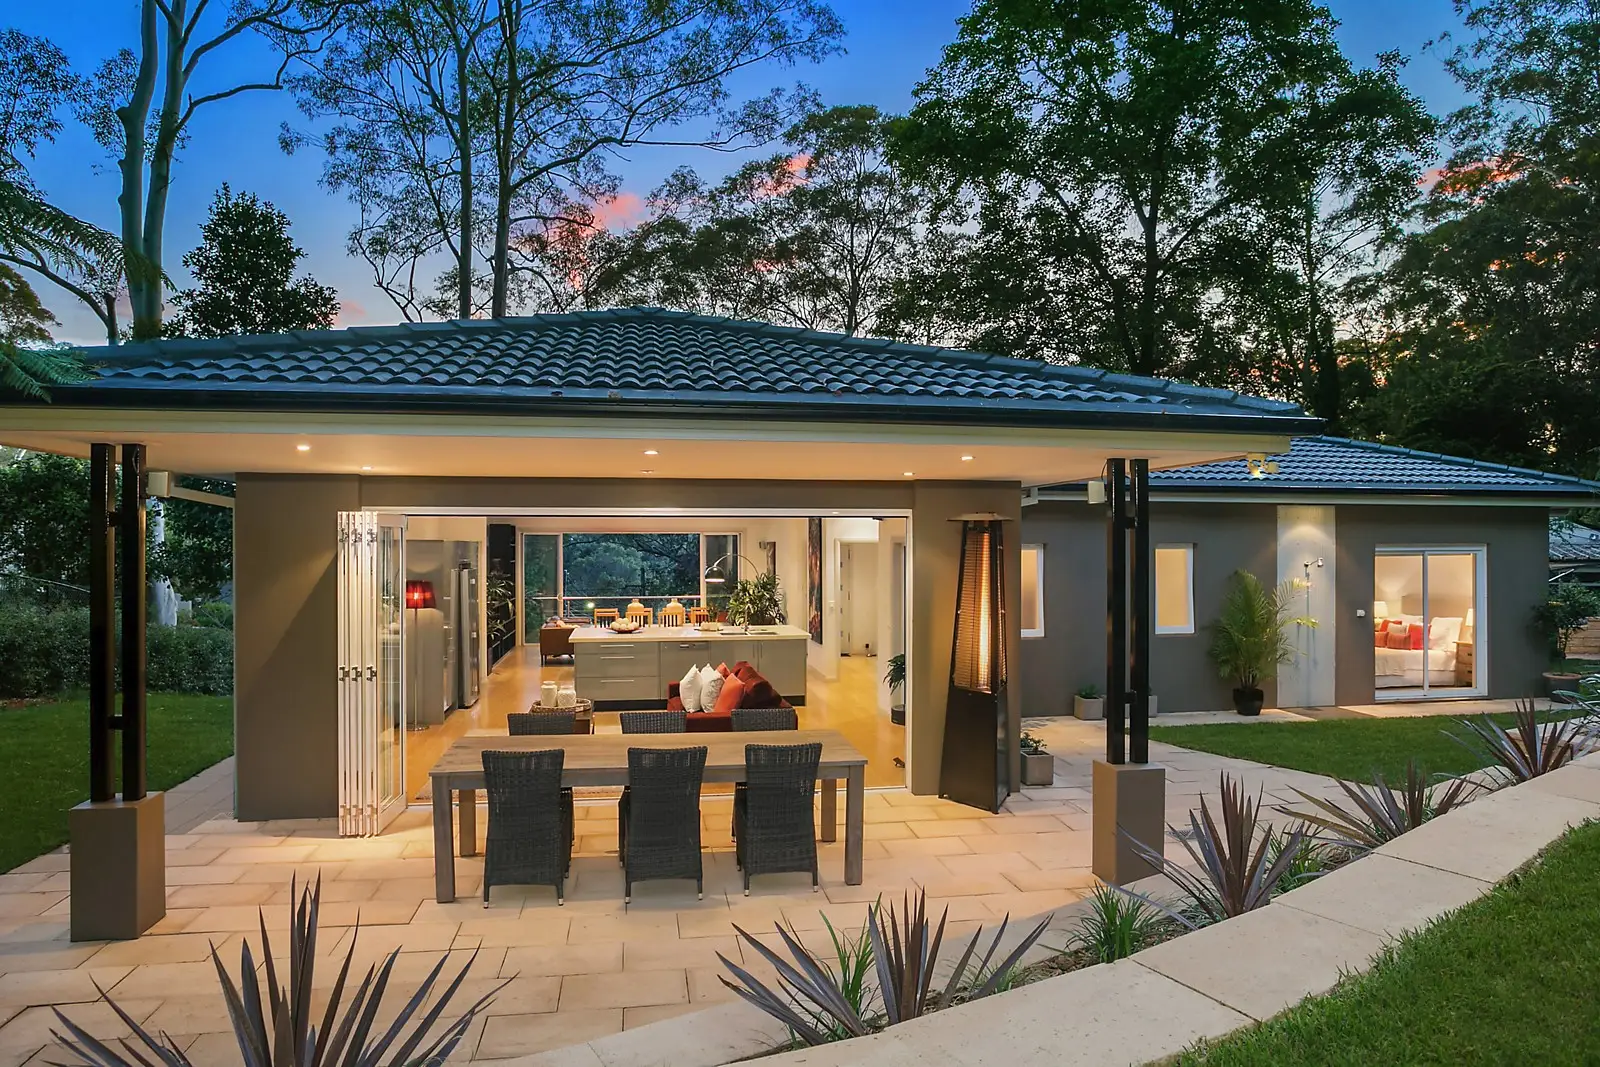 Photo #1: 14 Albion Avenue, Pymble - Sold by Sydney Sotheby's International Realty